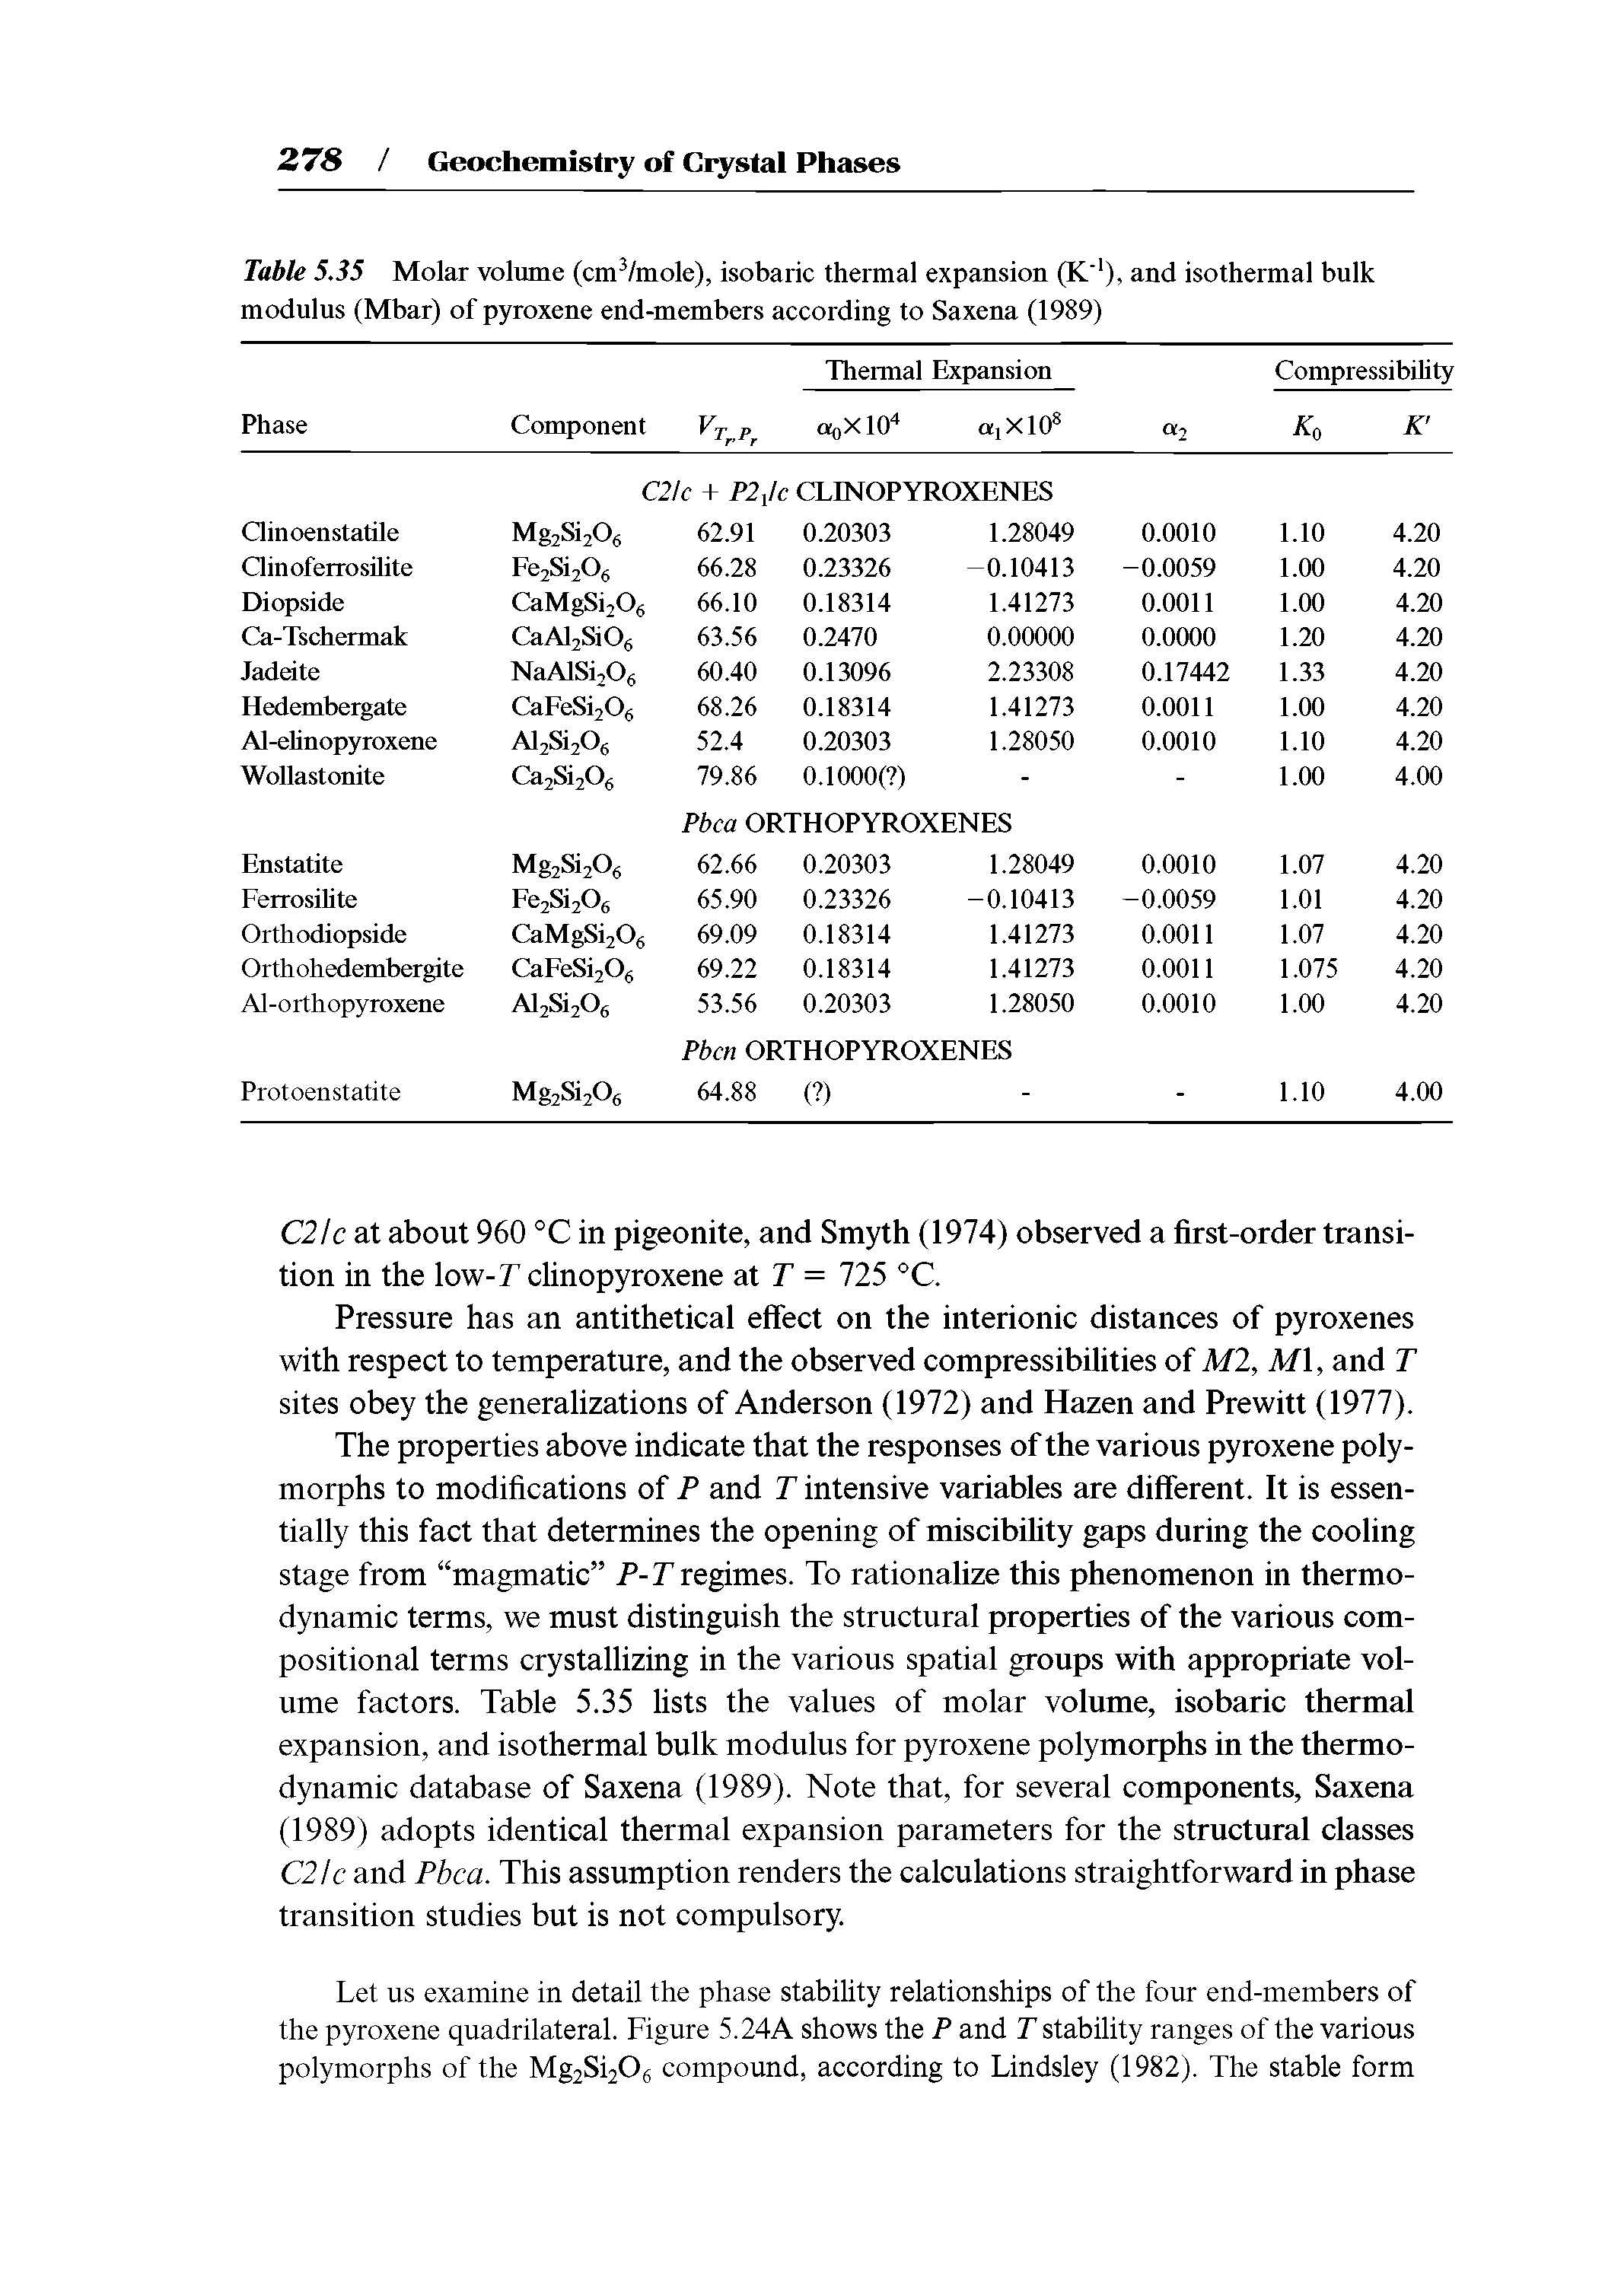 Table 5.35 Molar volnme (cm /mole), isobaric thermal expansion (K" ), and isothermal bulk modulus (Mbar) of pyroxene end-members according to Saxena (1989)...